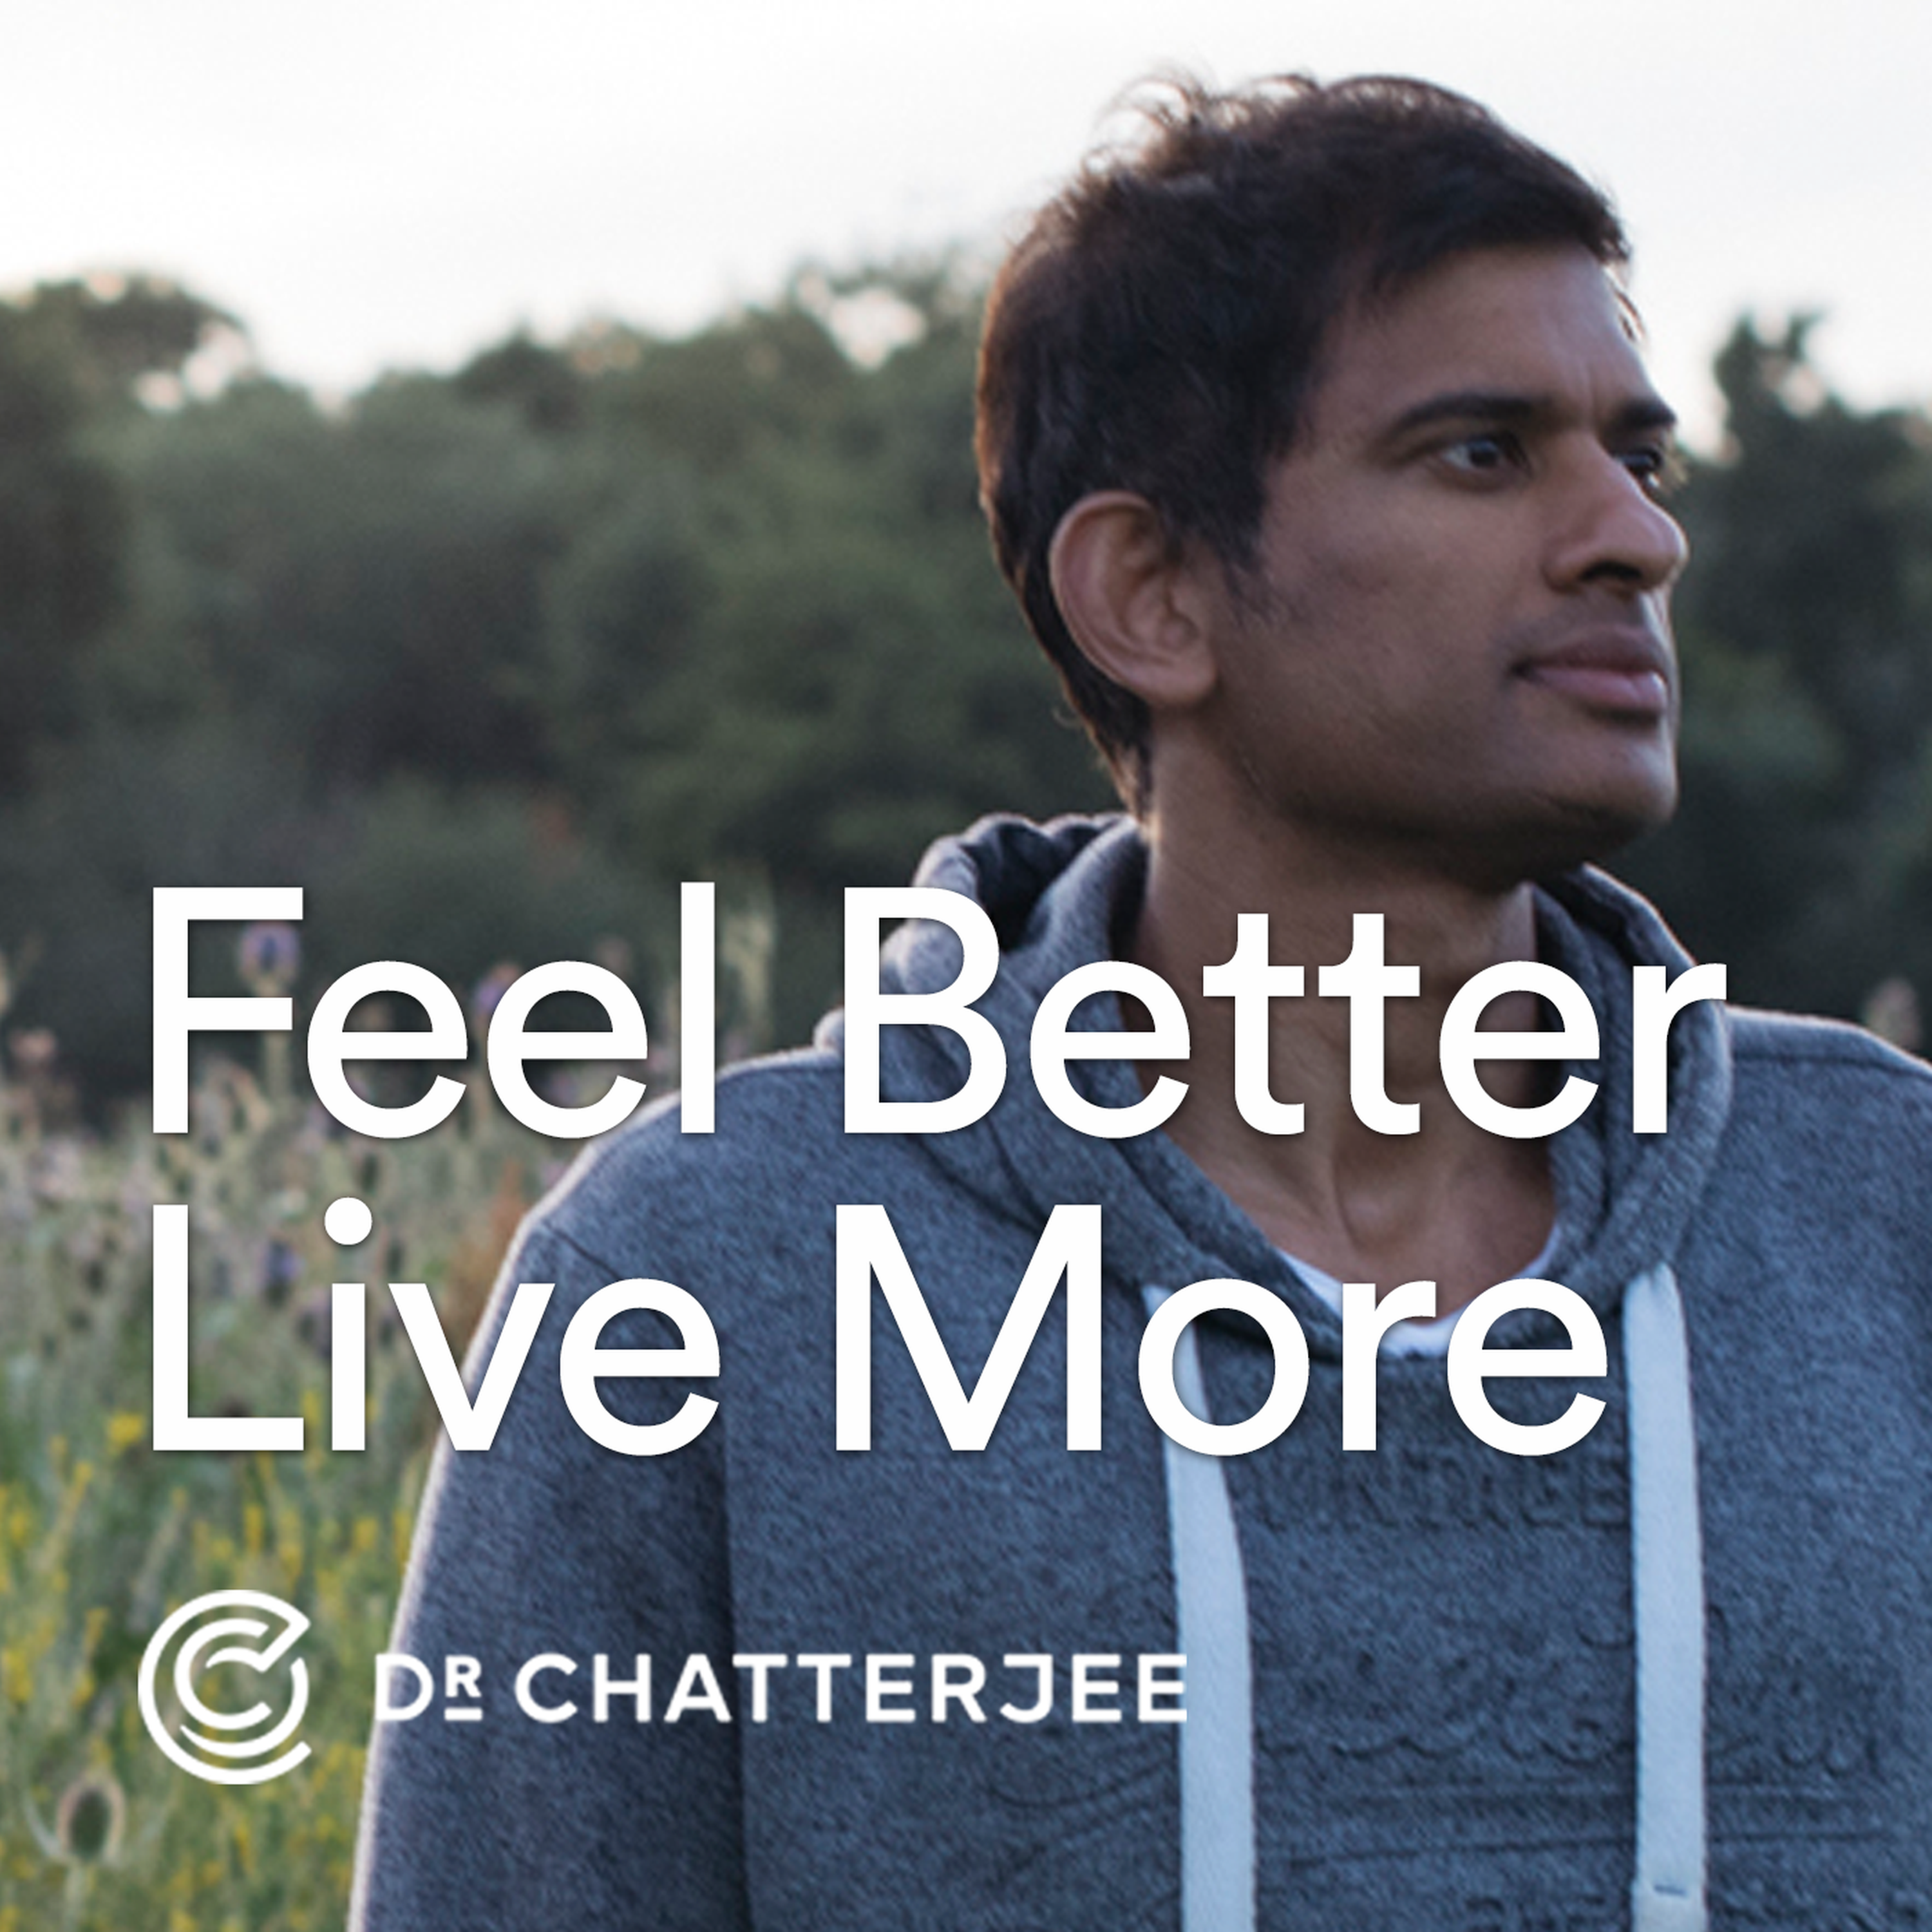 Best yoga & wellbeing books and podcasts - feel better live more podcast